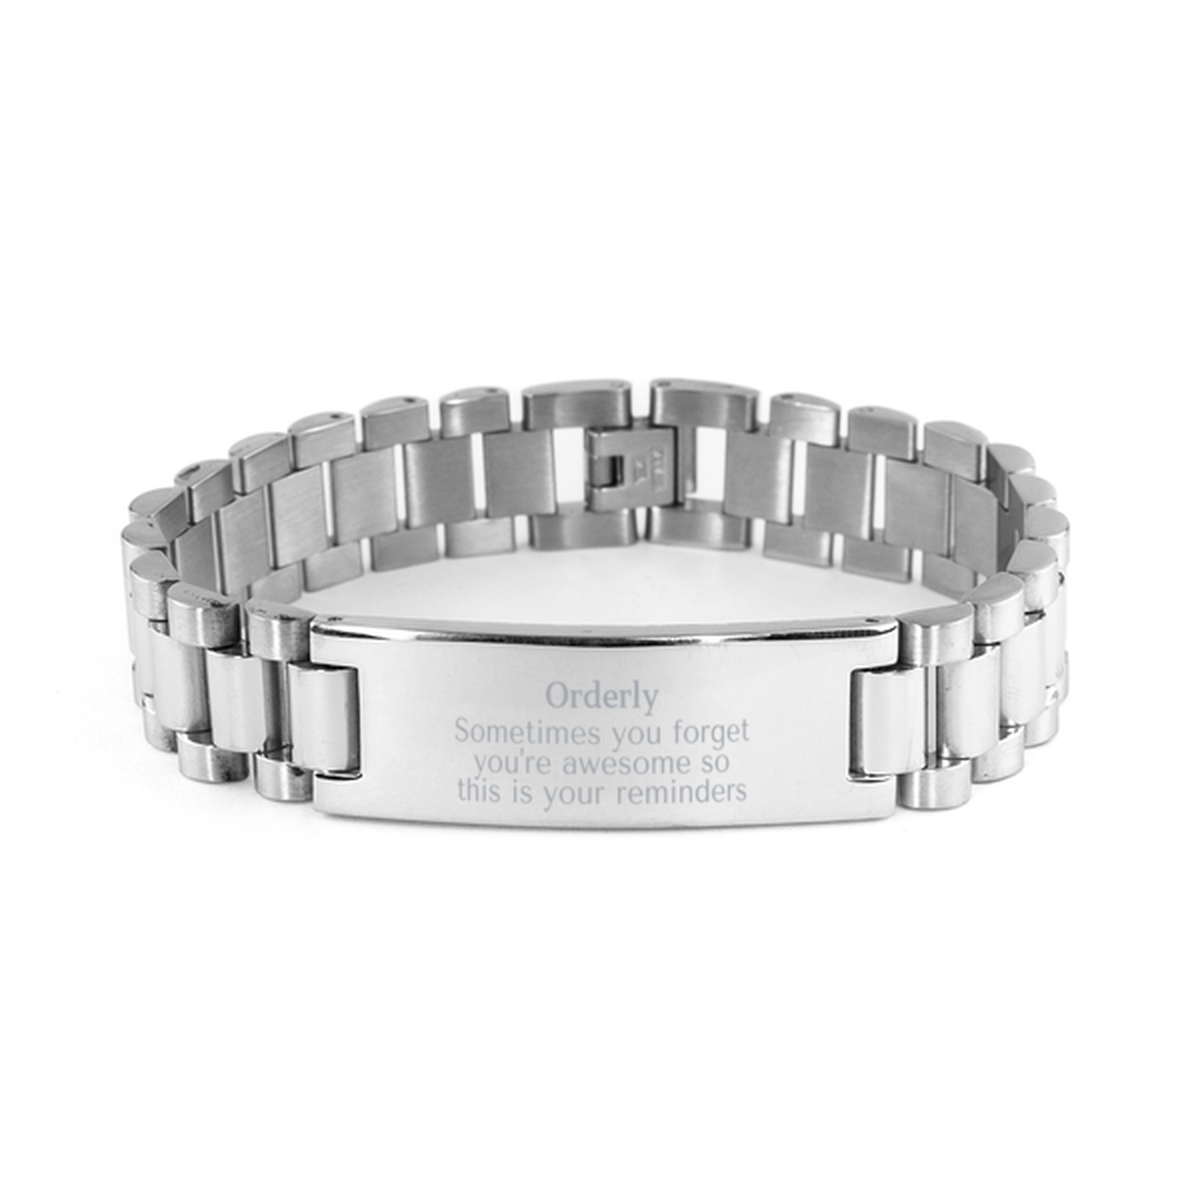 Sentimental Orderly Ladder Stainless Steel Bracelet, Orderly Sometimes you forget you're awesome so this is your reminders, Graduation Christmas Birthday Gifts for Orderly, Men, Women, Coworkers